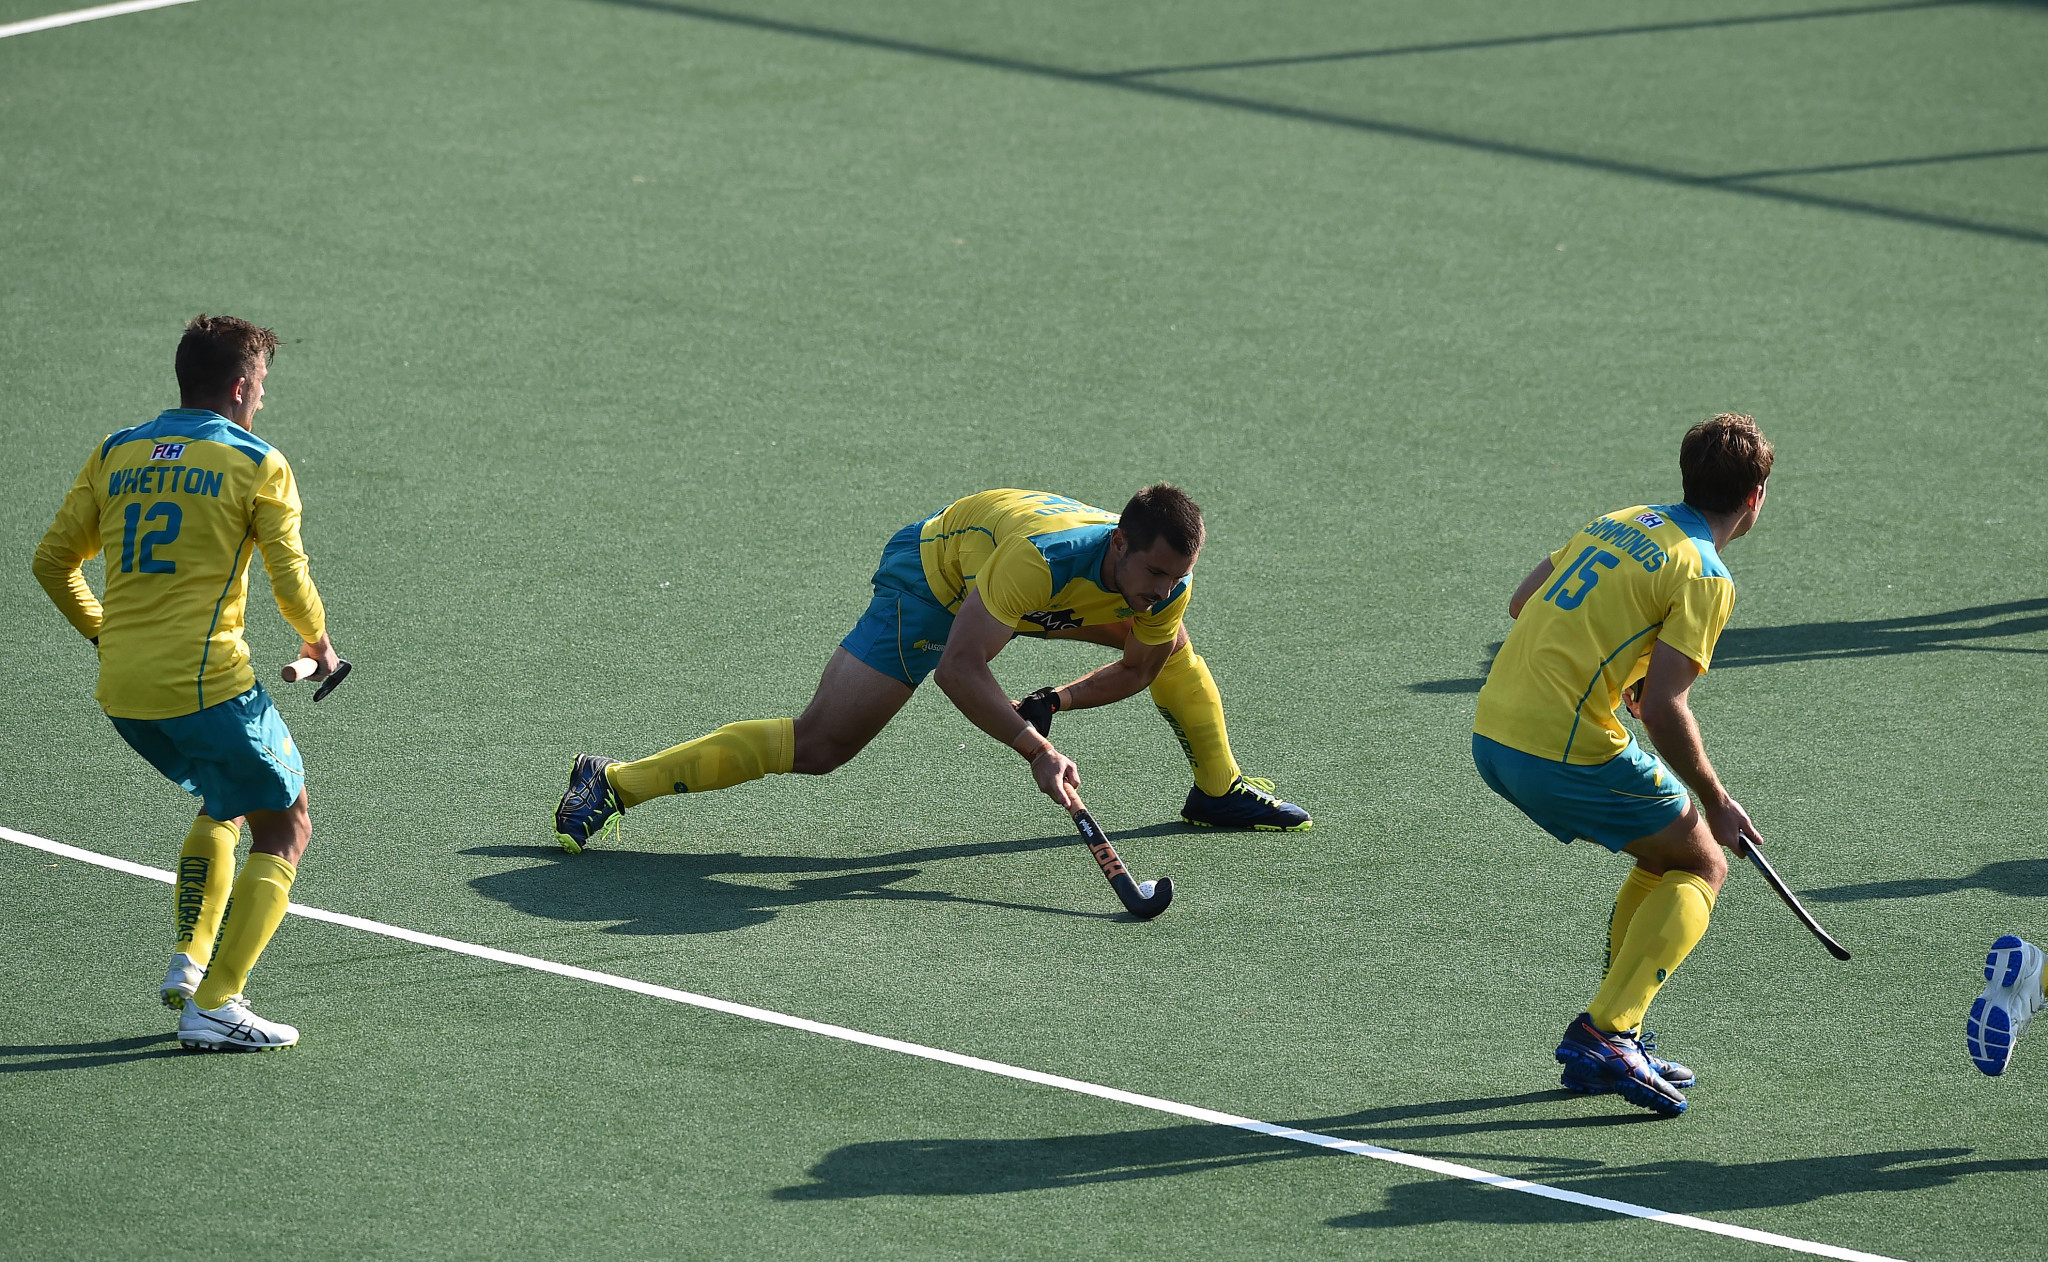 Australia's men enter the FIH Pro League Grand Final after winning the league phase ©Getty Images